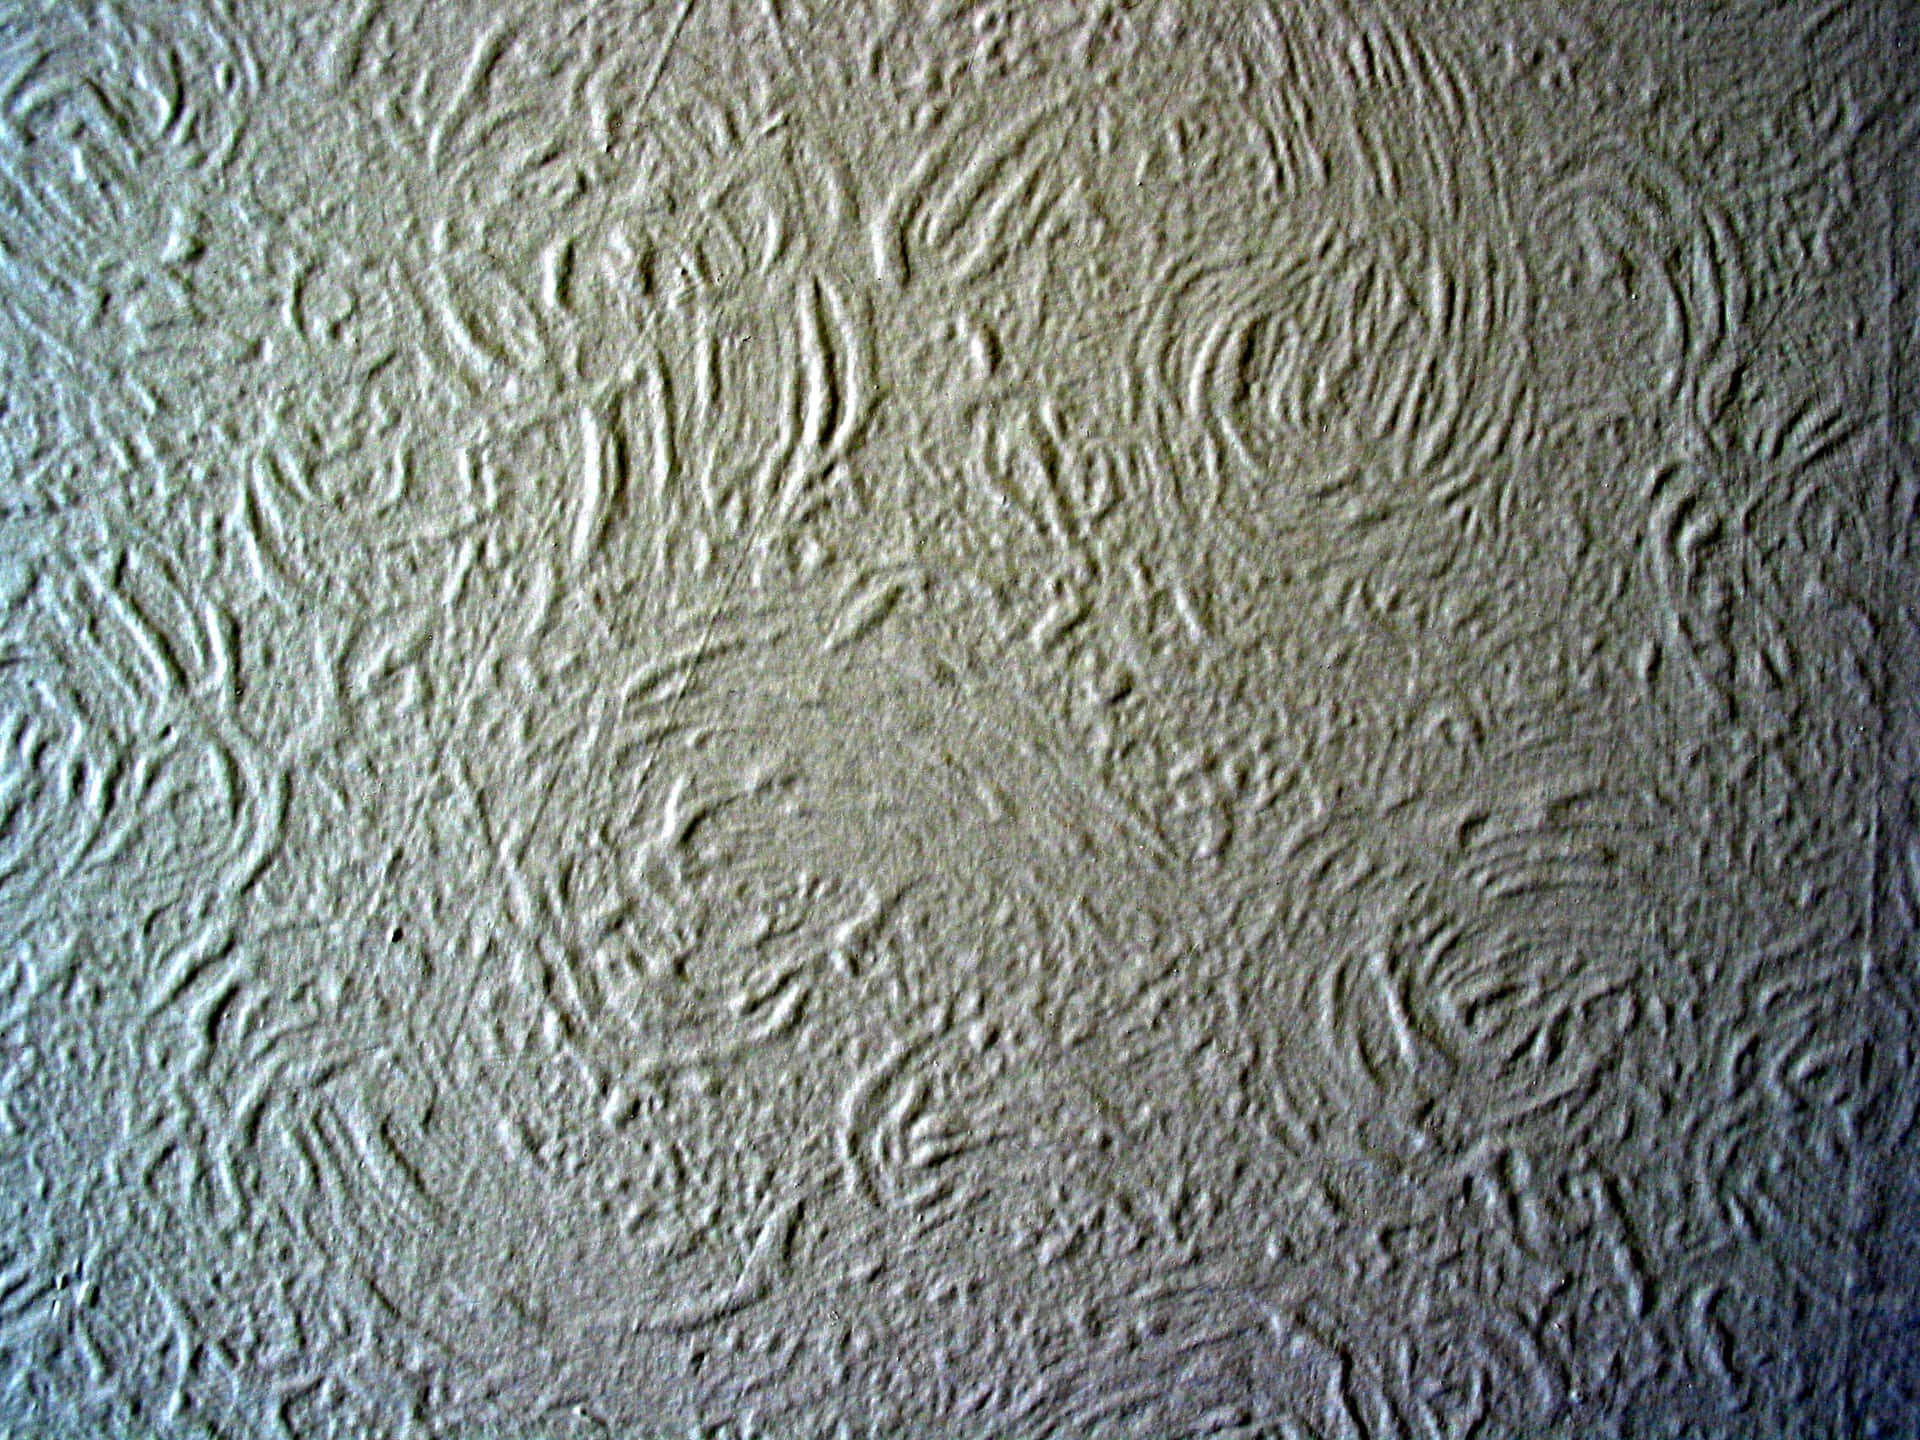 Artistic Texture Wall Image